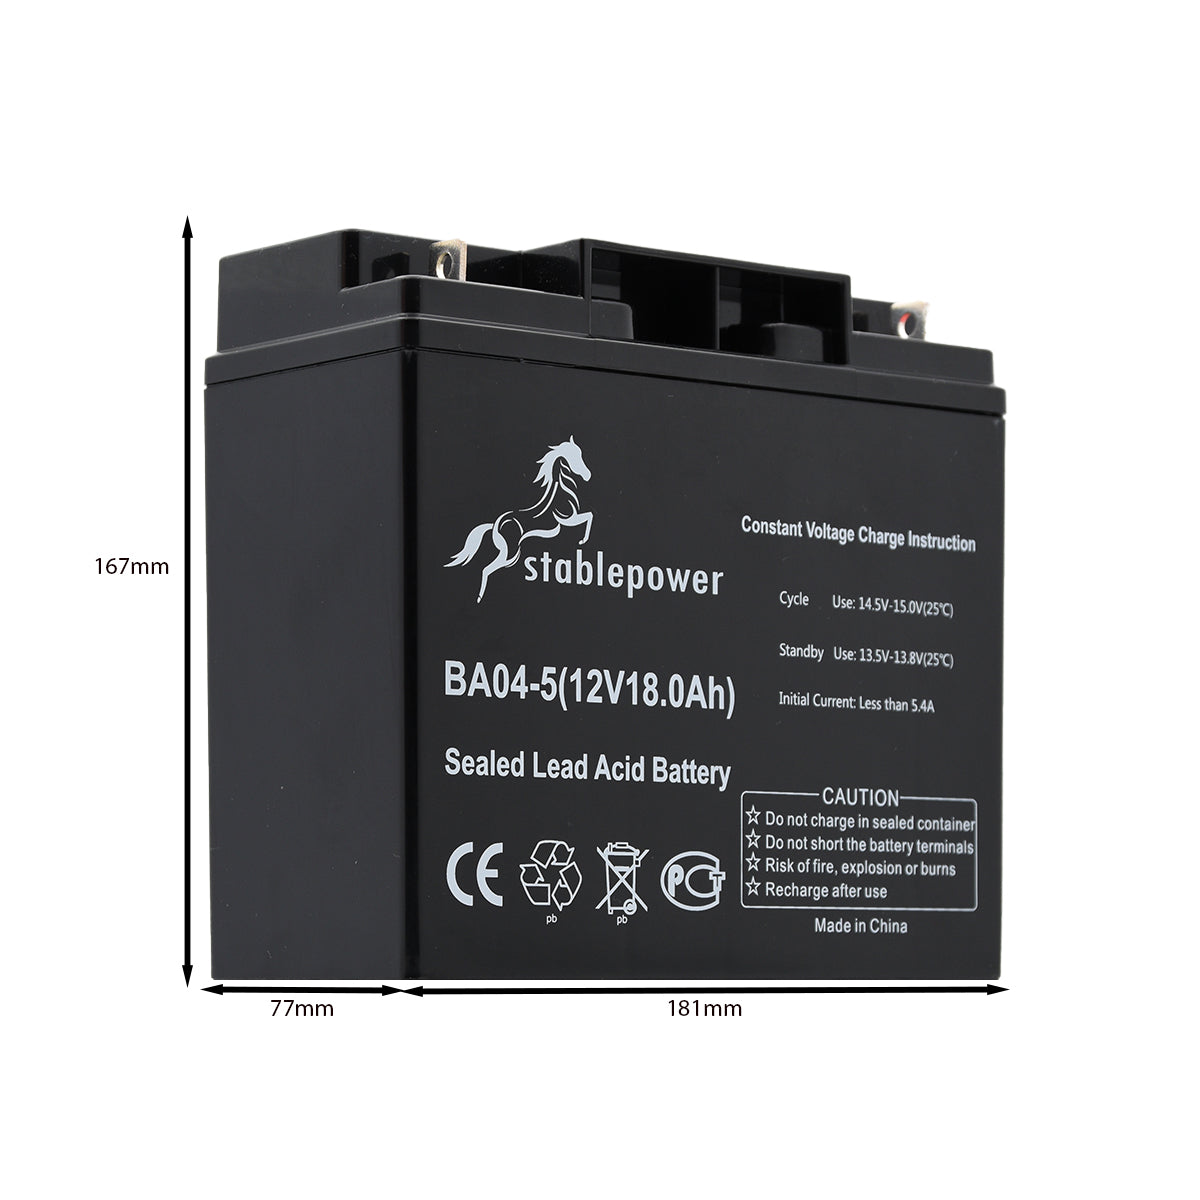 Stablepower 12V 18AH Rechargeable Sealed Lead Acid Battery Dimensions BA04-5